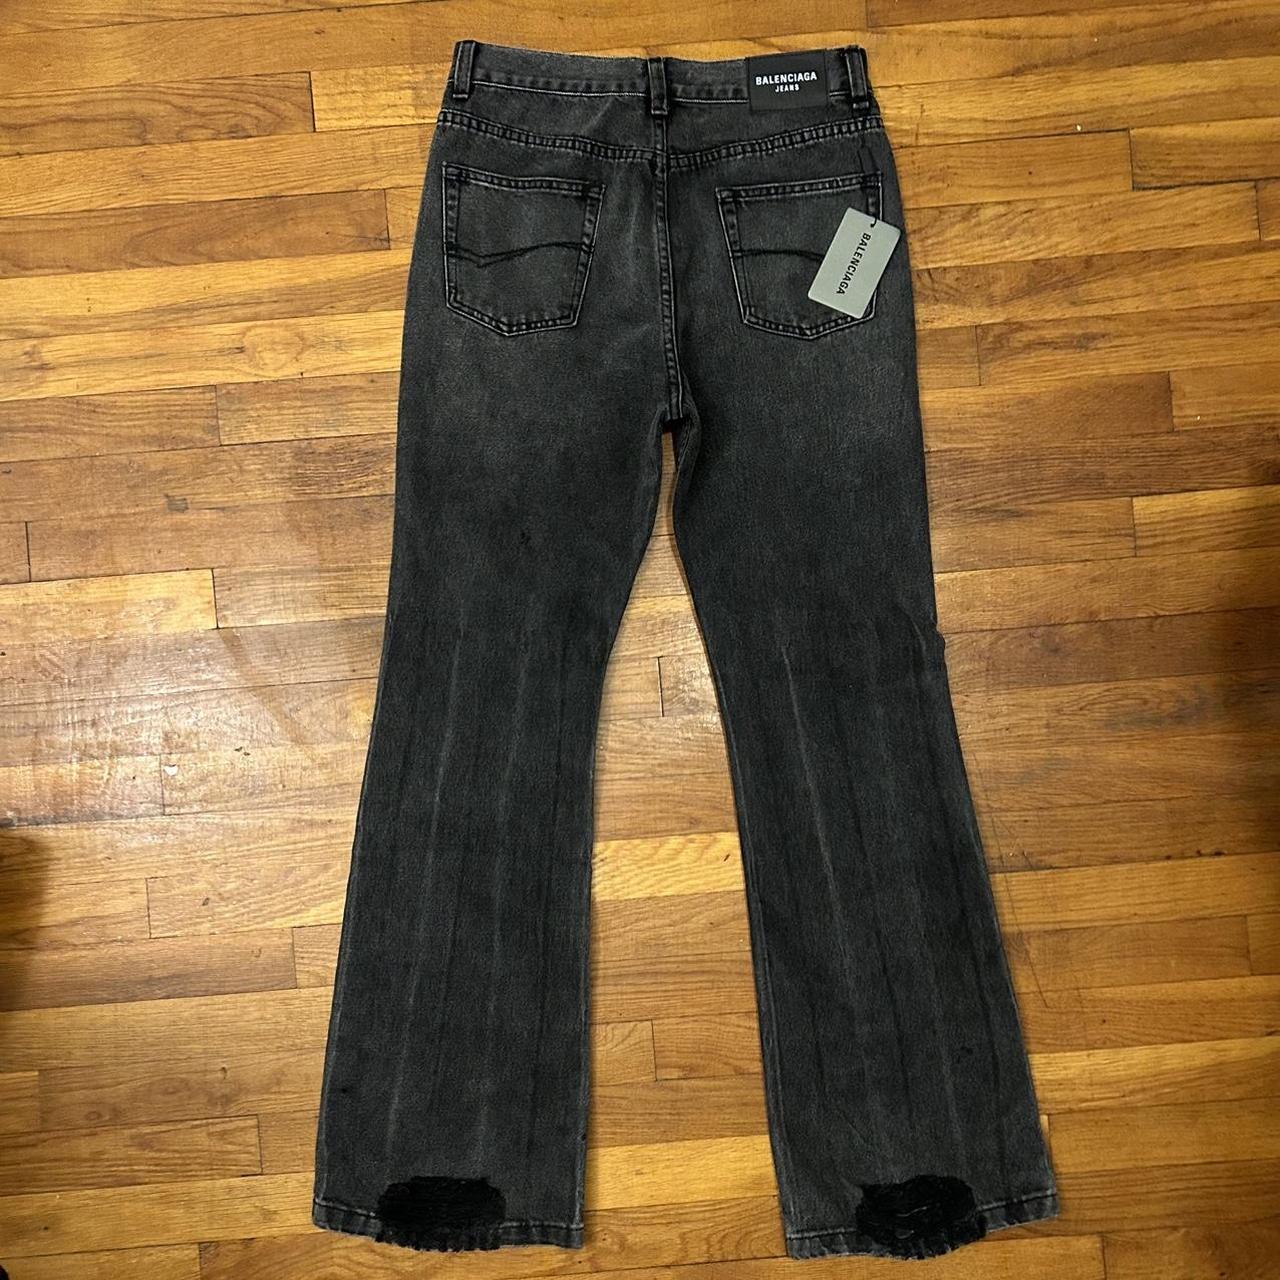 balenciaga lost tape flared jeans Size 29 to 30 Open... - Depop